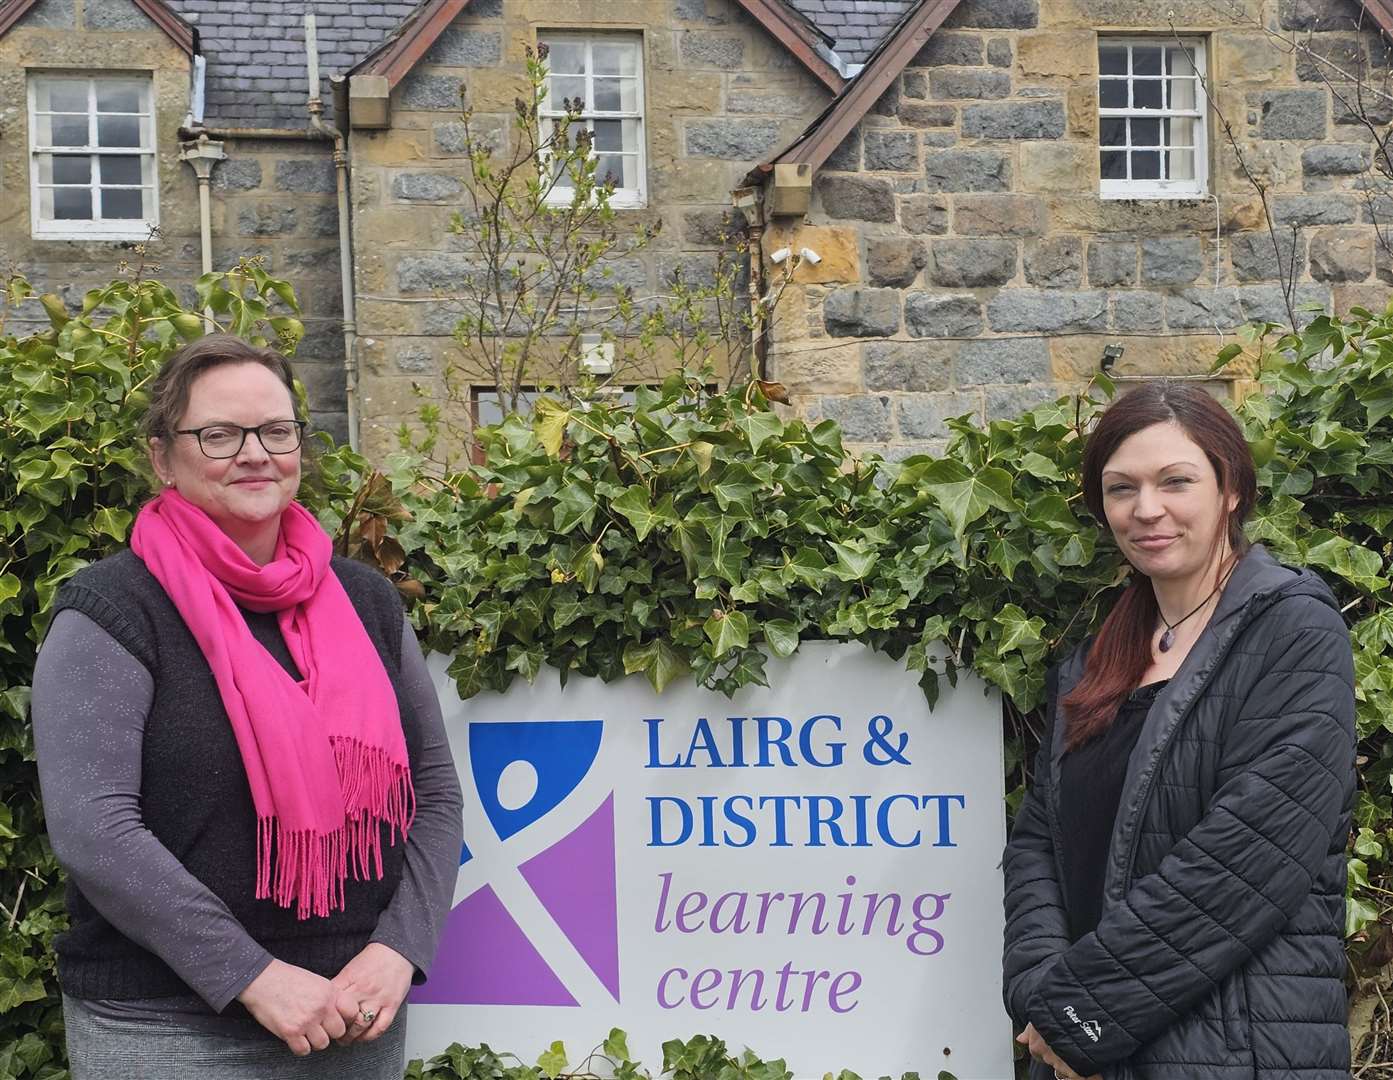 Sarah Forrest, left, and Heather Bruce outside Lairg and District Learning Centre.